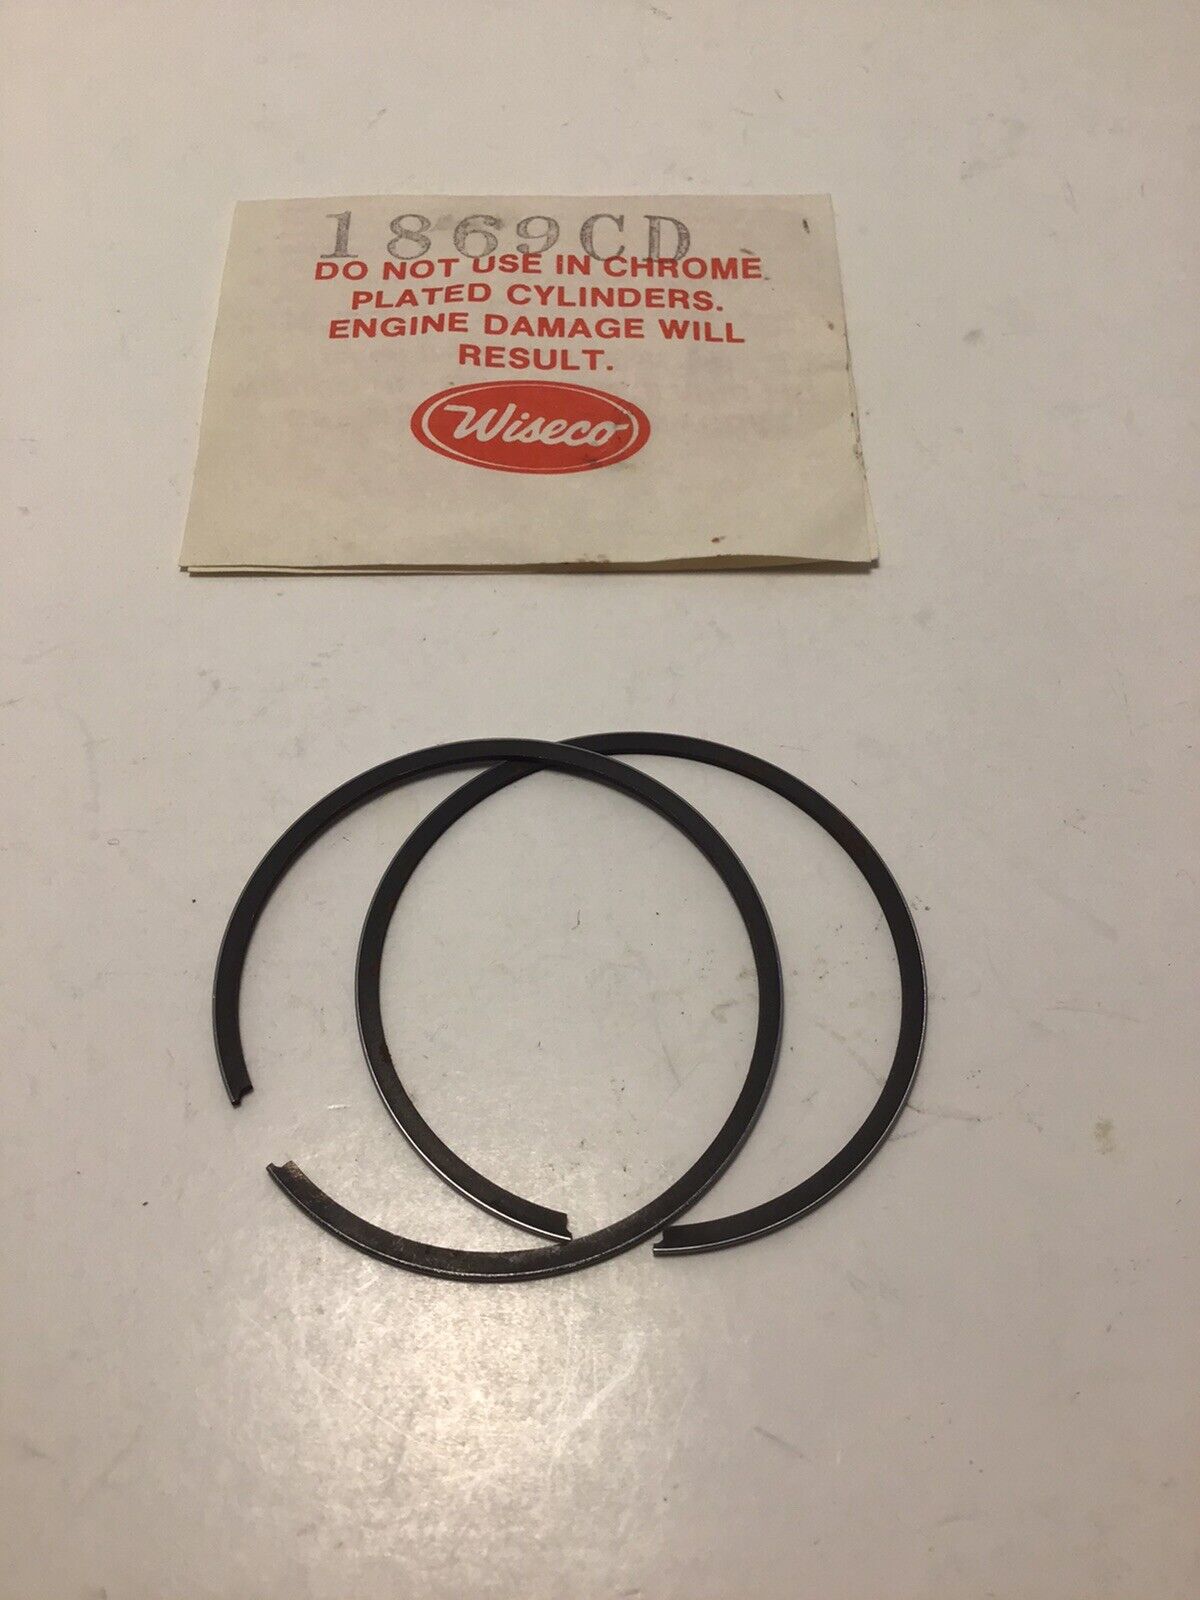 NOS Piston  Rings  Yamaha YZ80 BW80 PW80 CR80 Wiseco Part # 1869CD